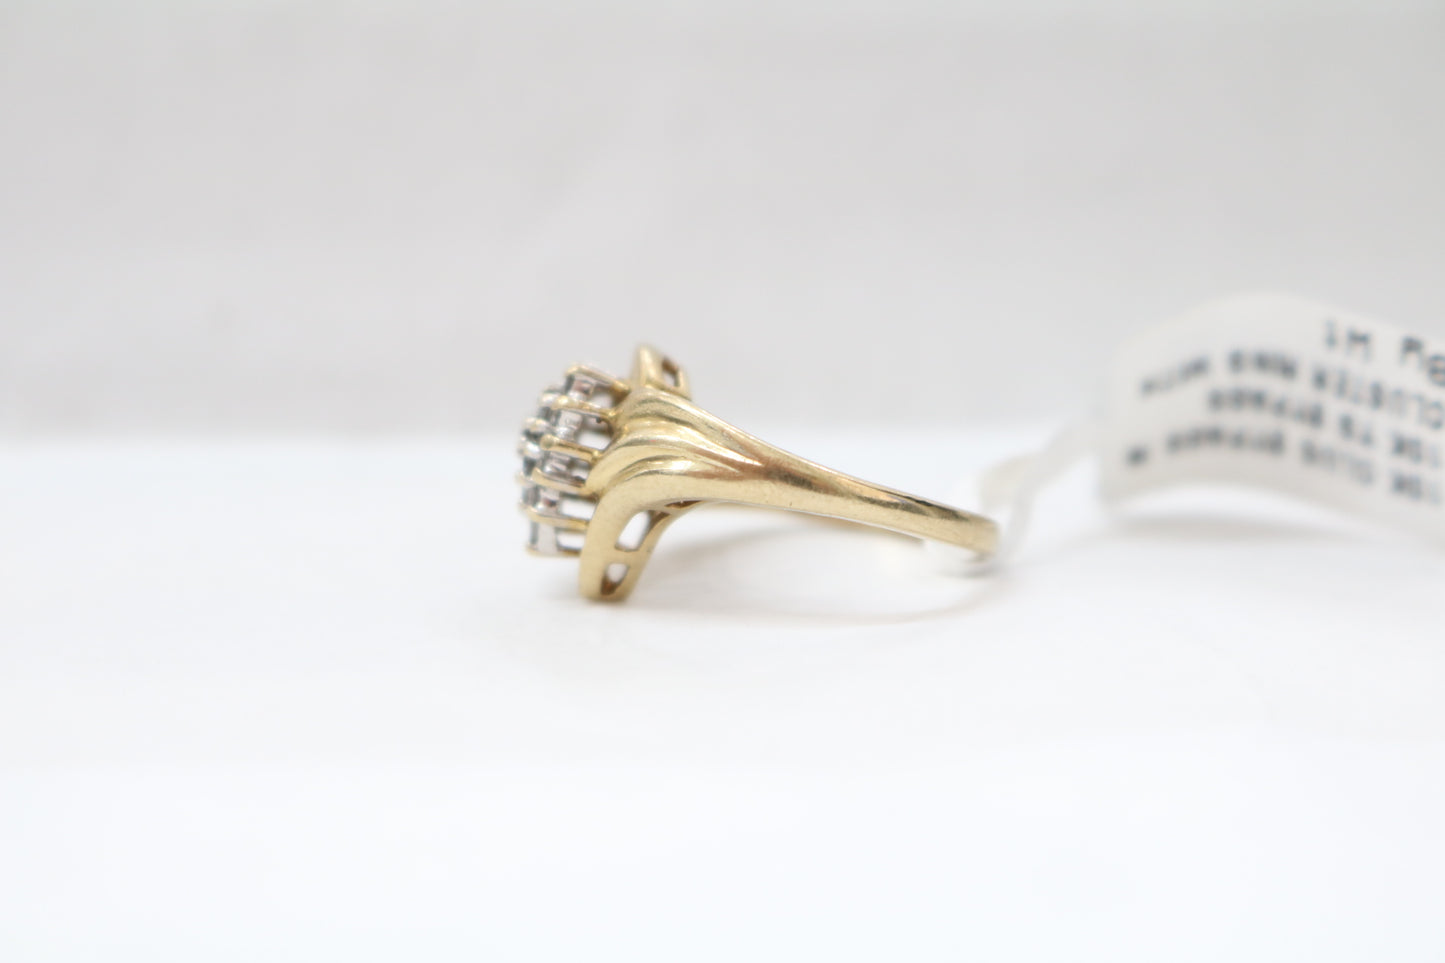 10K Yellow Gold Cluster Diamond Ring (Size 5 1/4) (0.20 CTW)